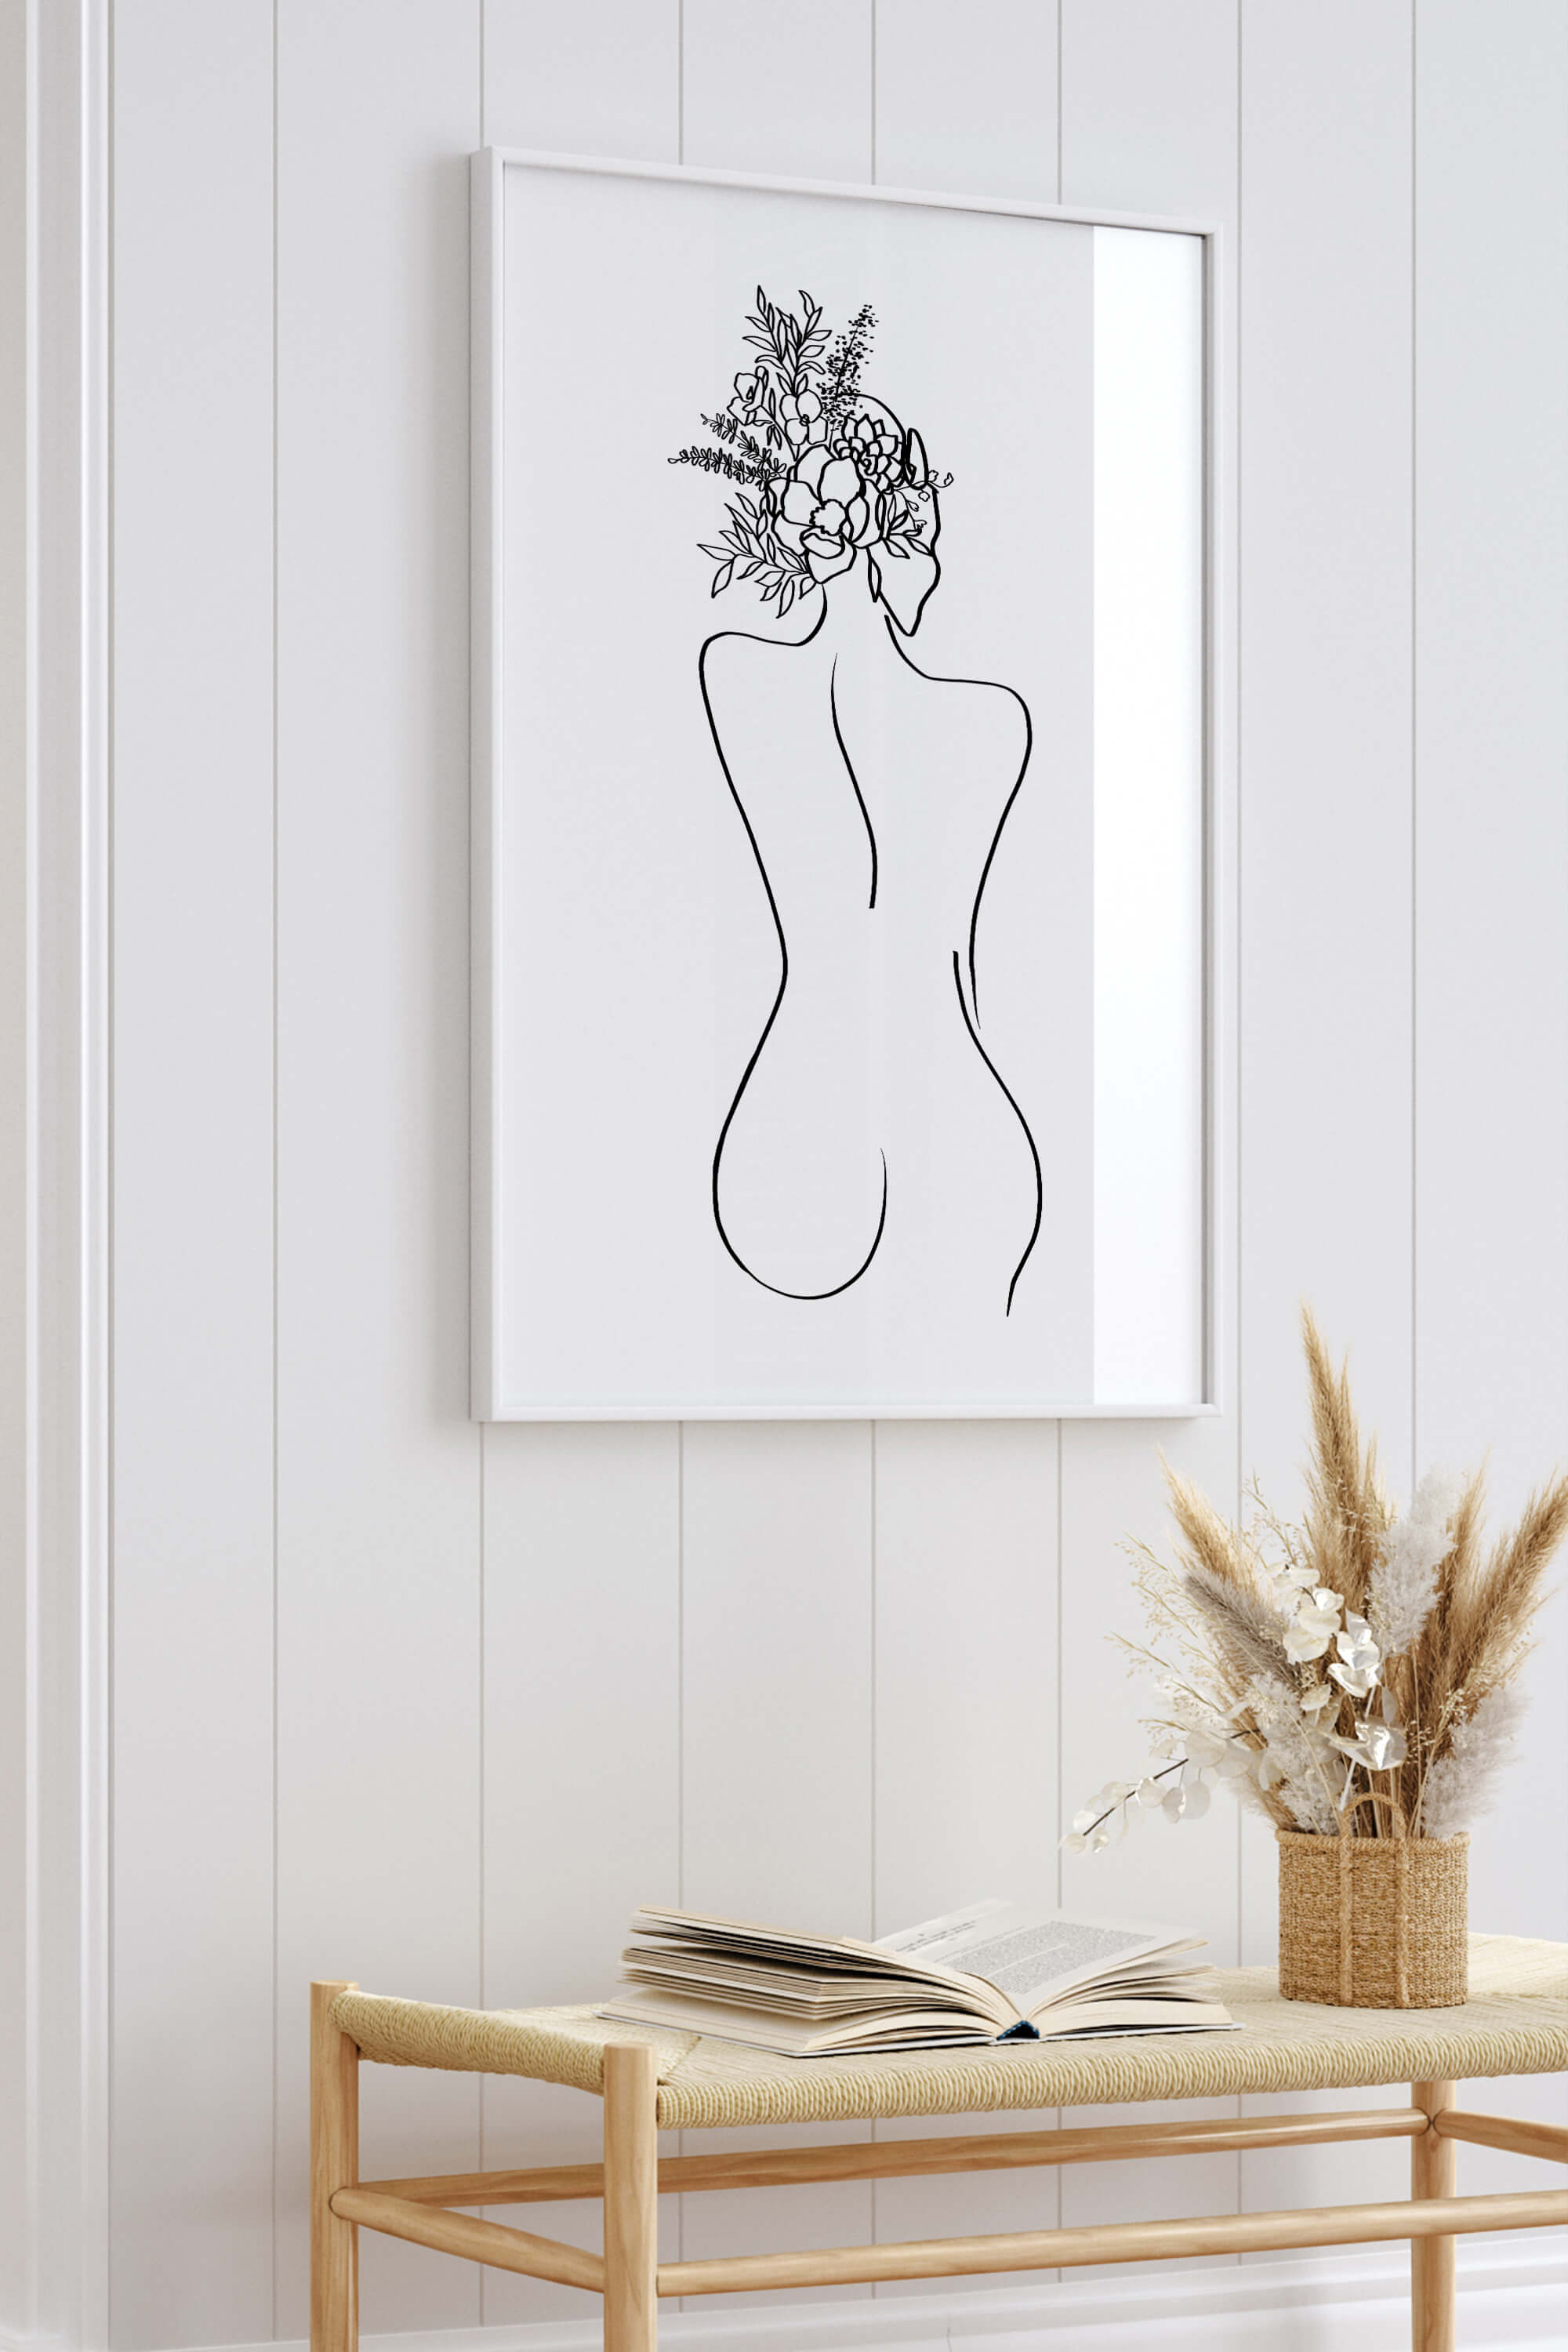 Elevate your surroundings with this art print, a channel for emotions and self-expression. The mix of symbolic femininity and monochromatic simplicity creates a resonant atmosphere.